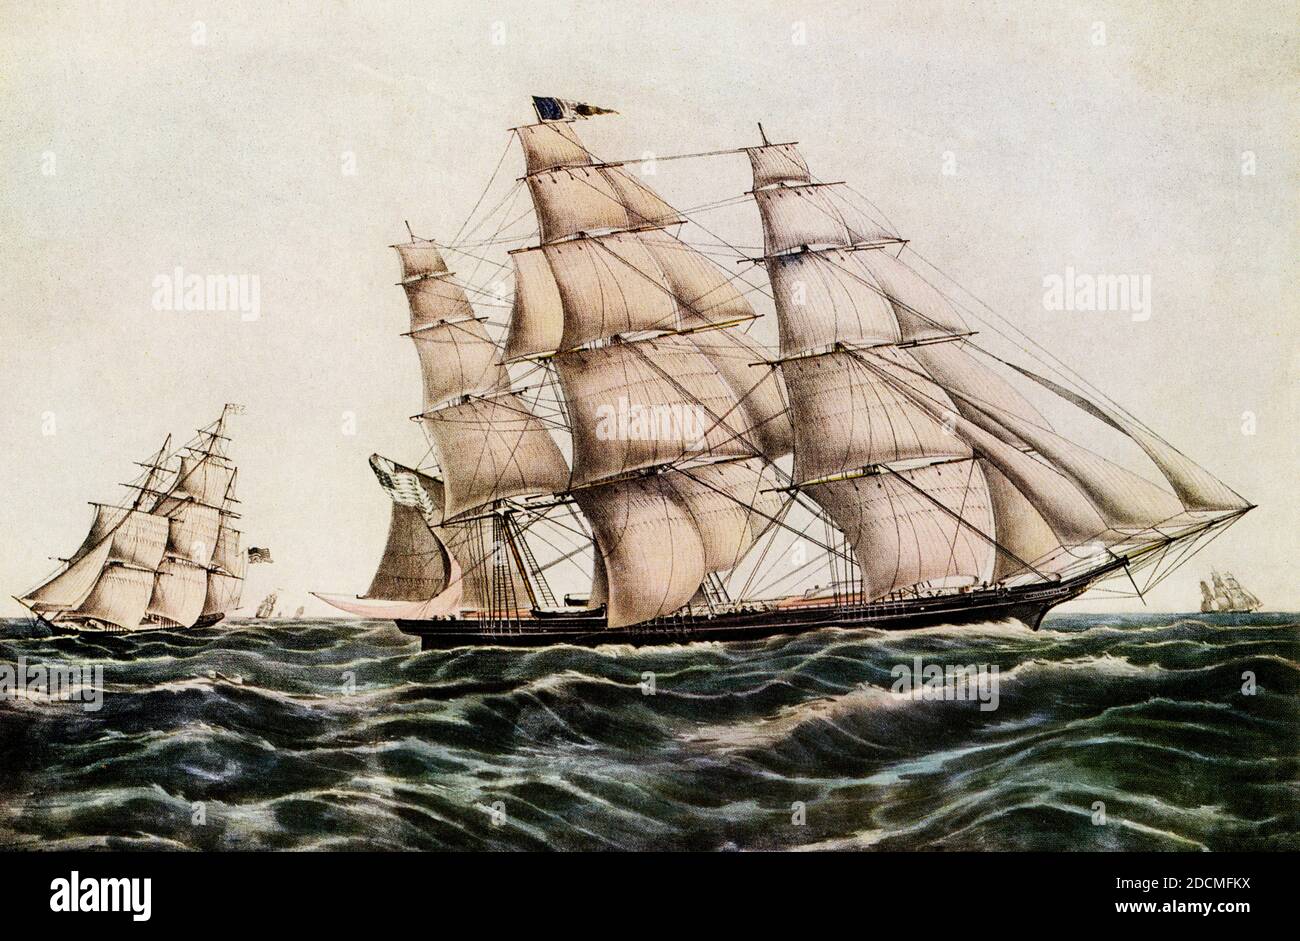 Clipper Ship 'Sweepstakes' F F Palmer lith publisher N Currier 1855 Stock Photo